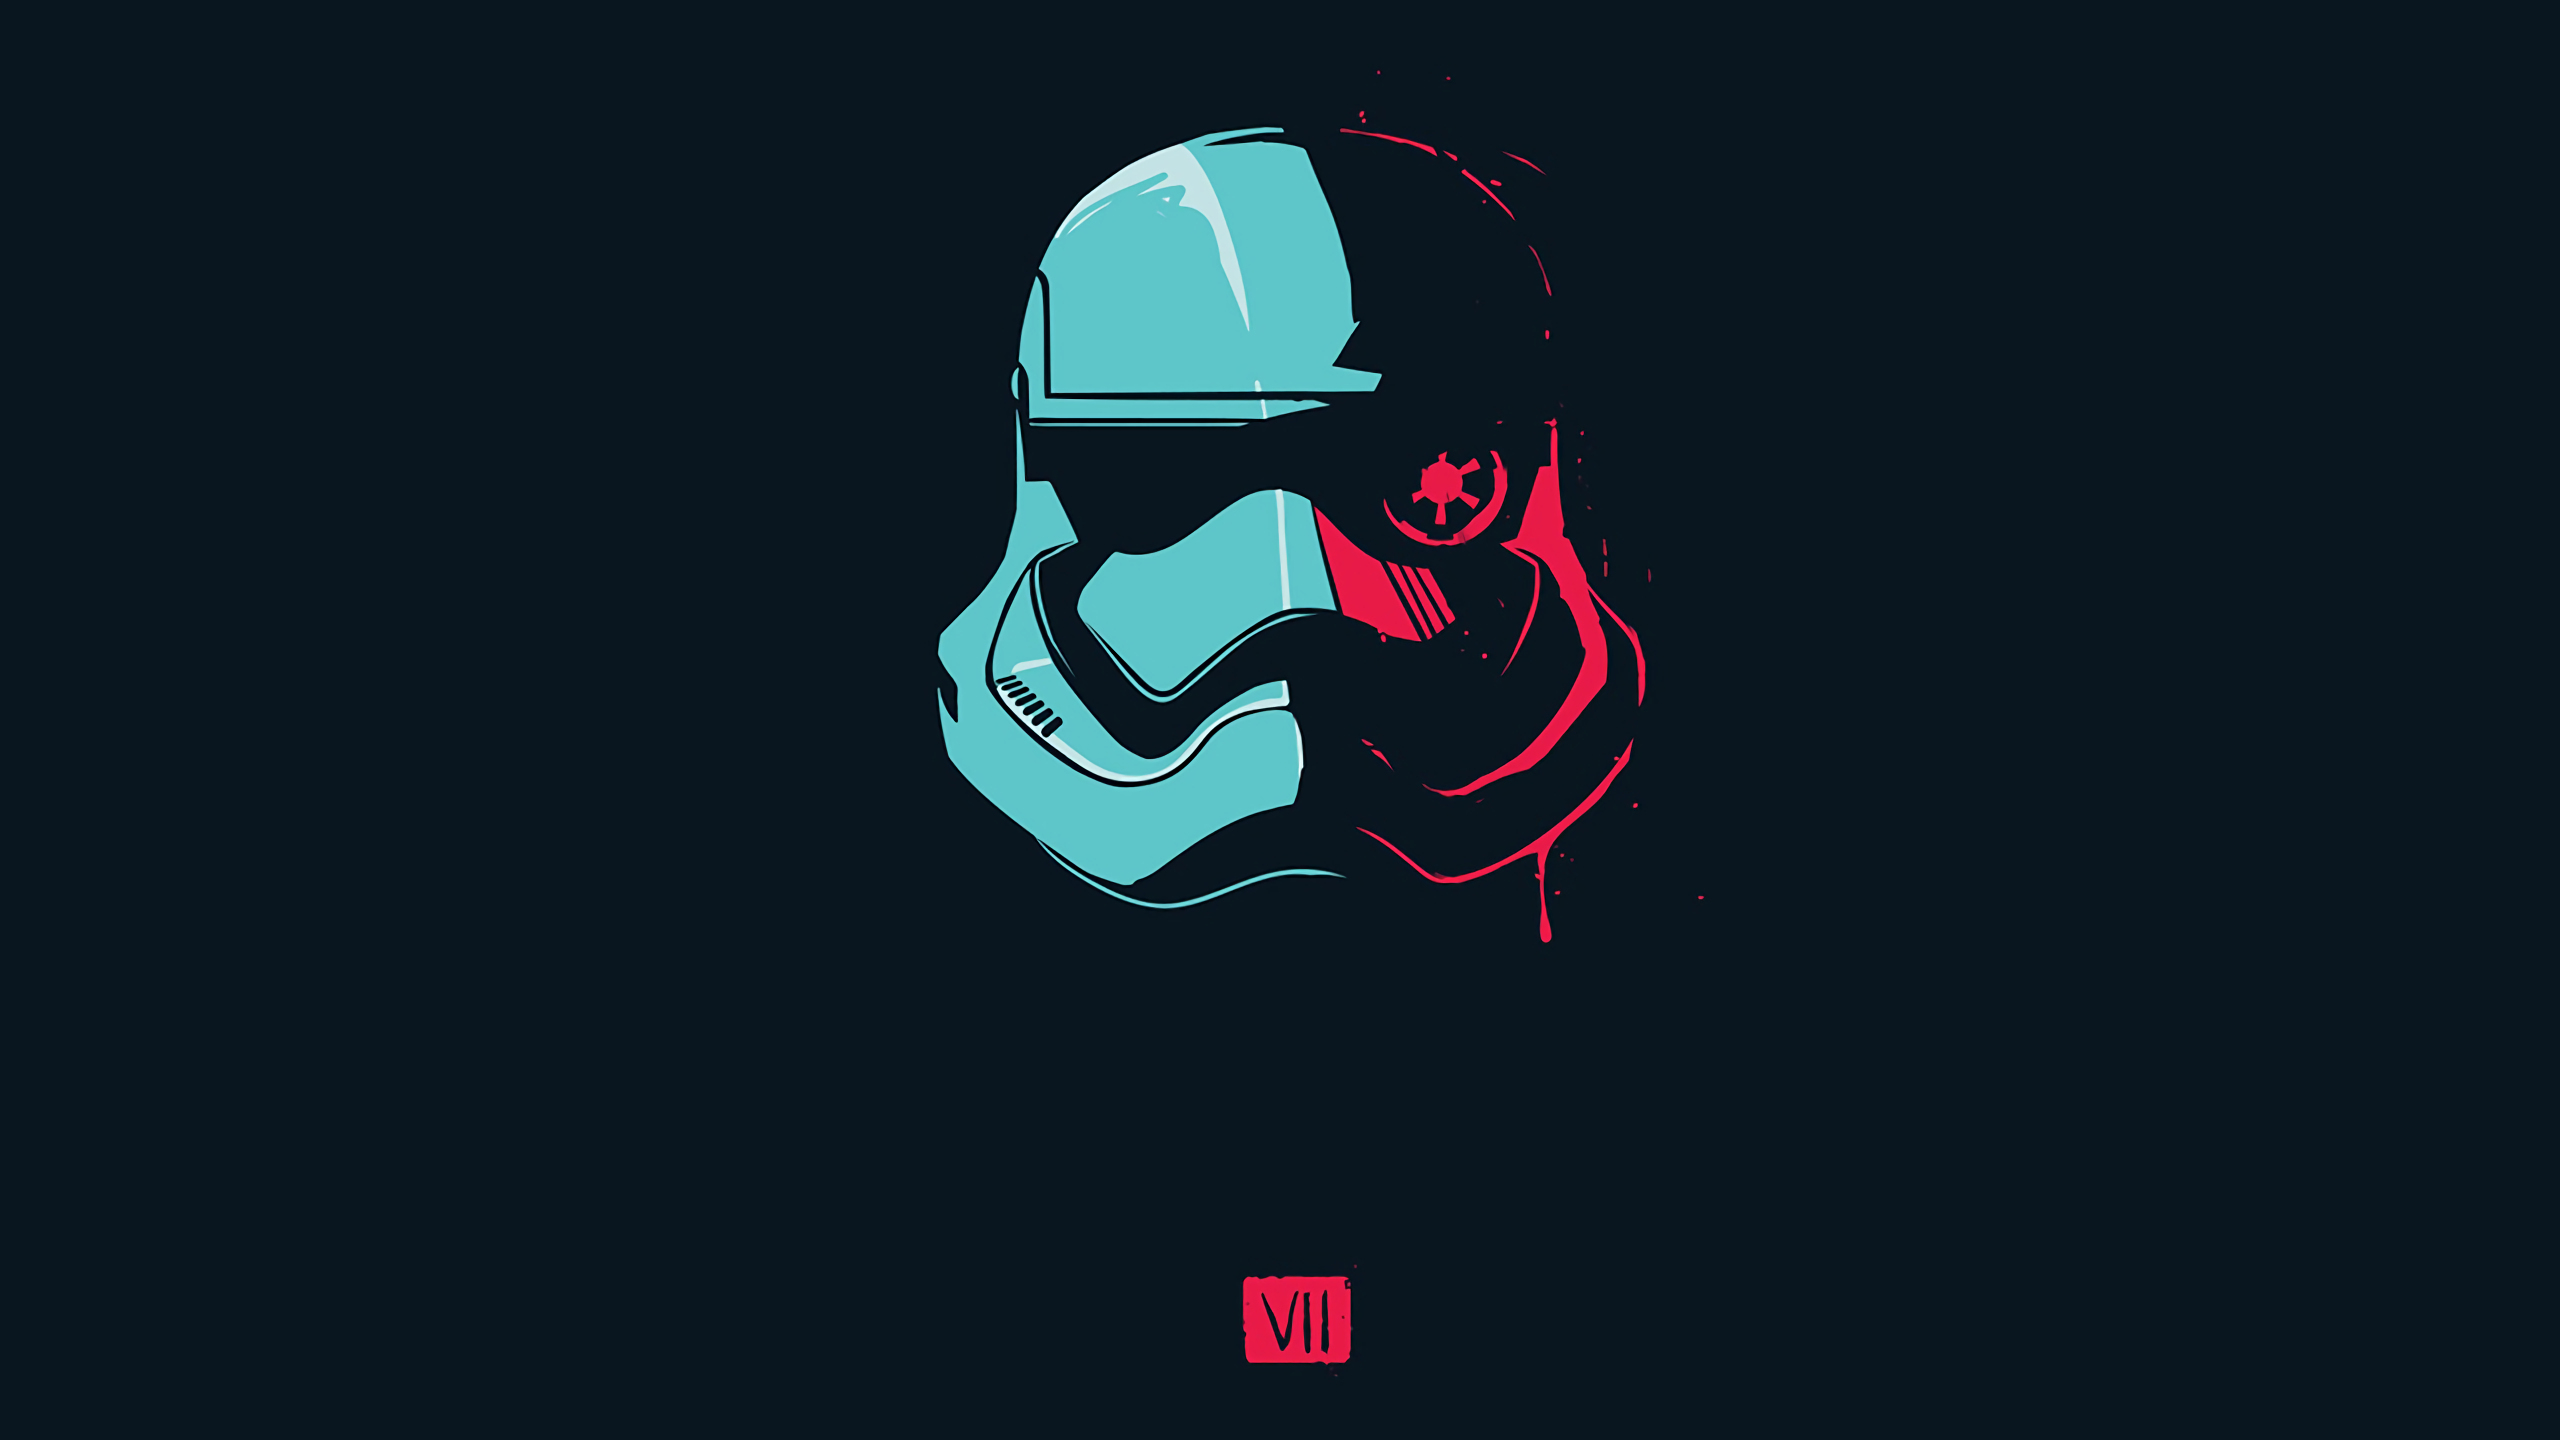 General 2560x1440 Star Wars Star Wars: The Force Awakens The First Order movies helmet simple background cyan First Order Trooper science fiction